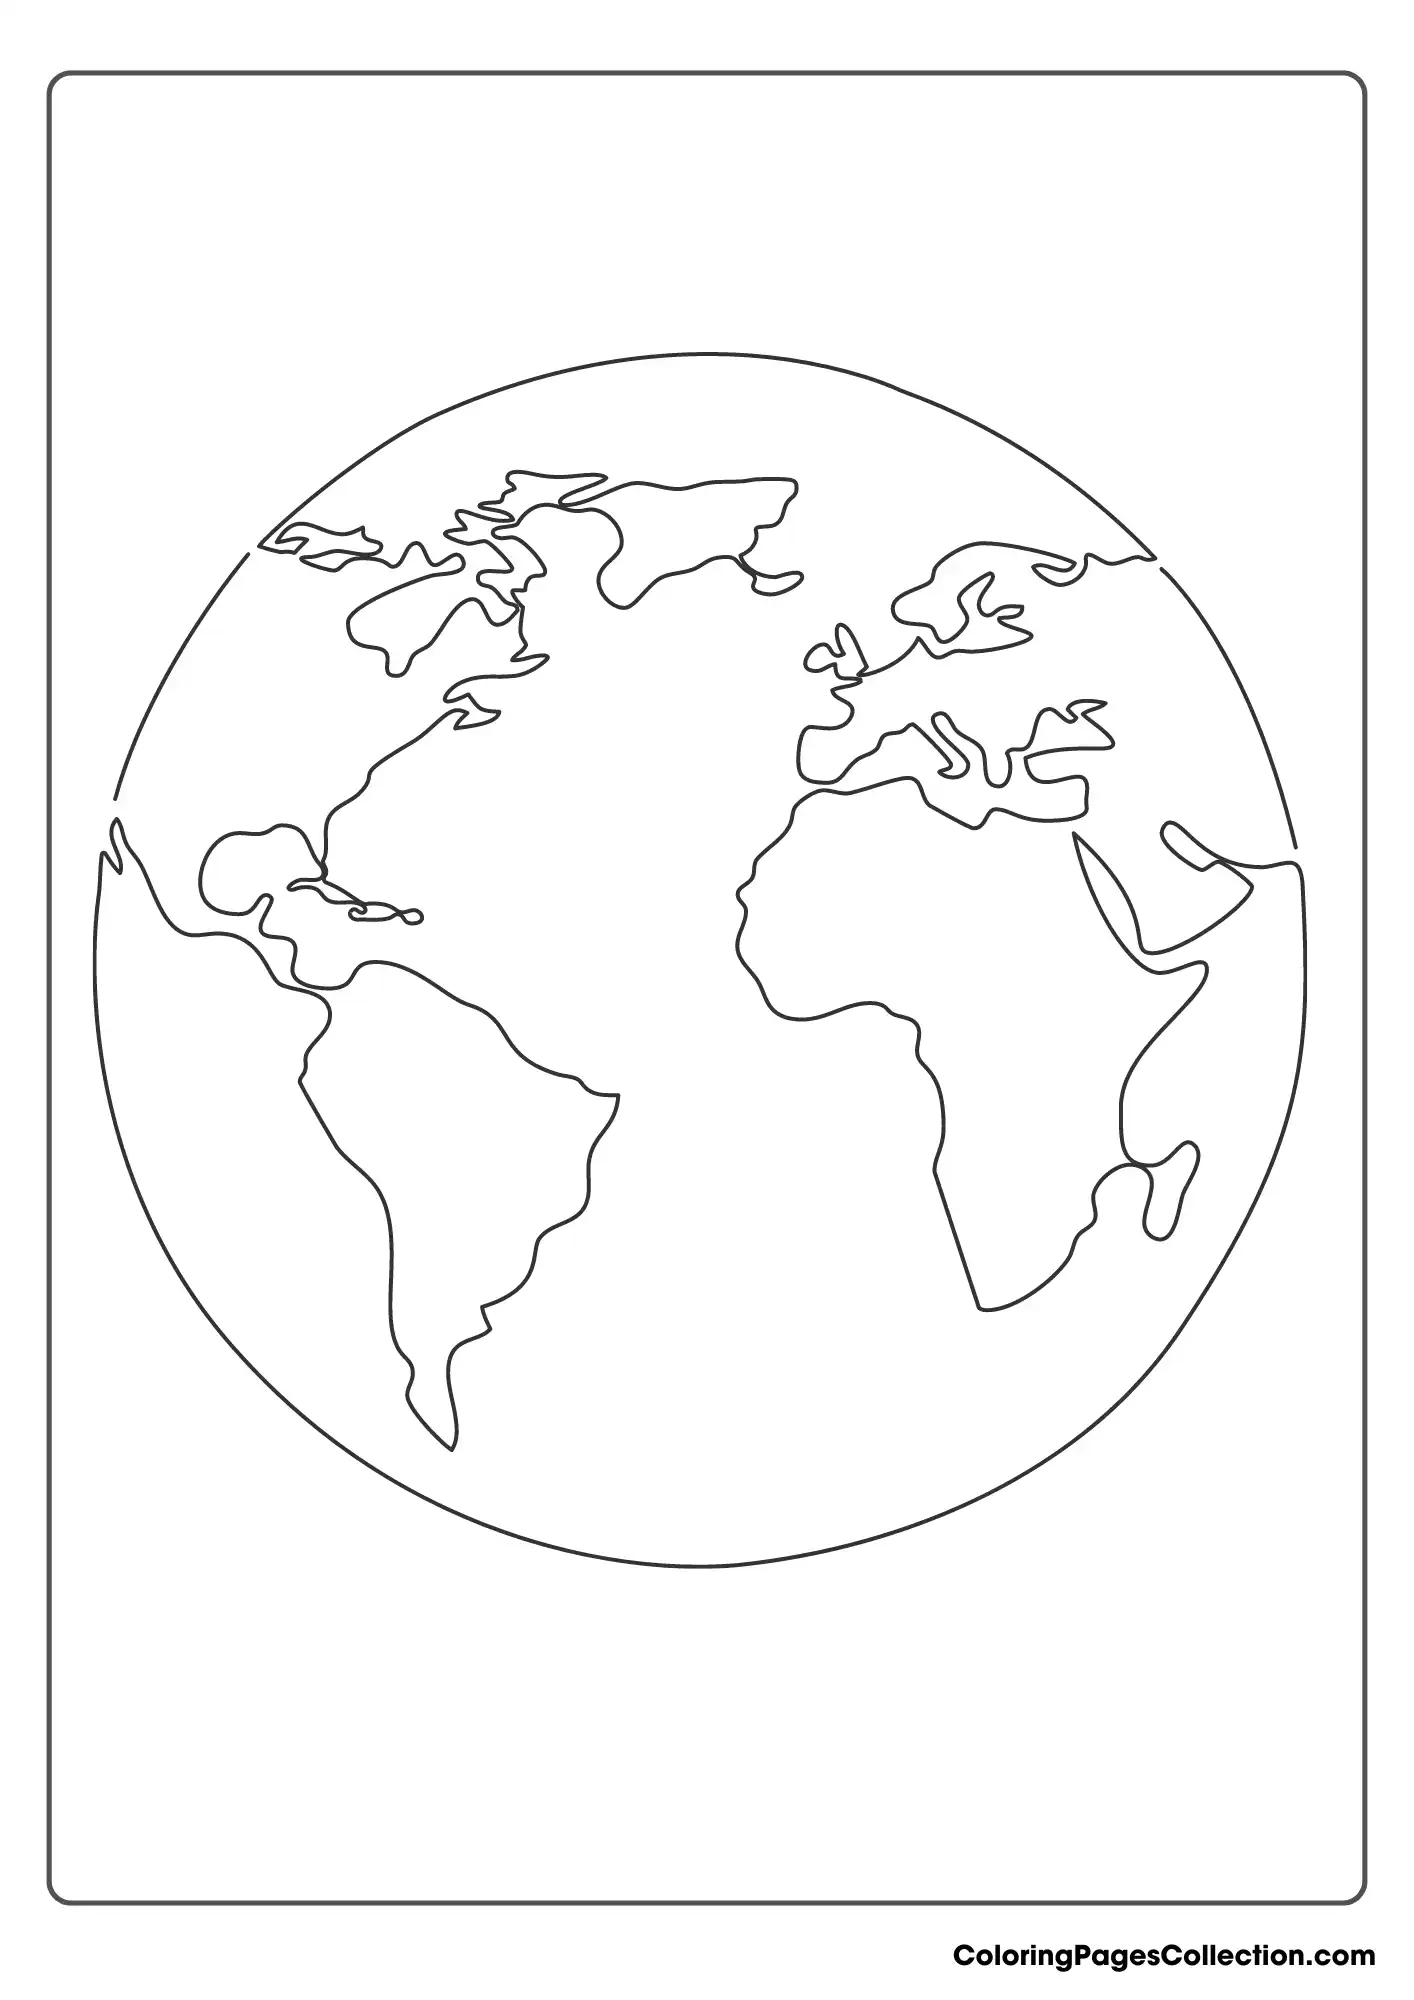 Coloring pages for teens, Earth Outline